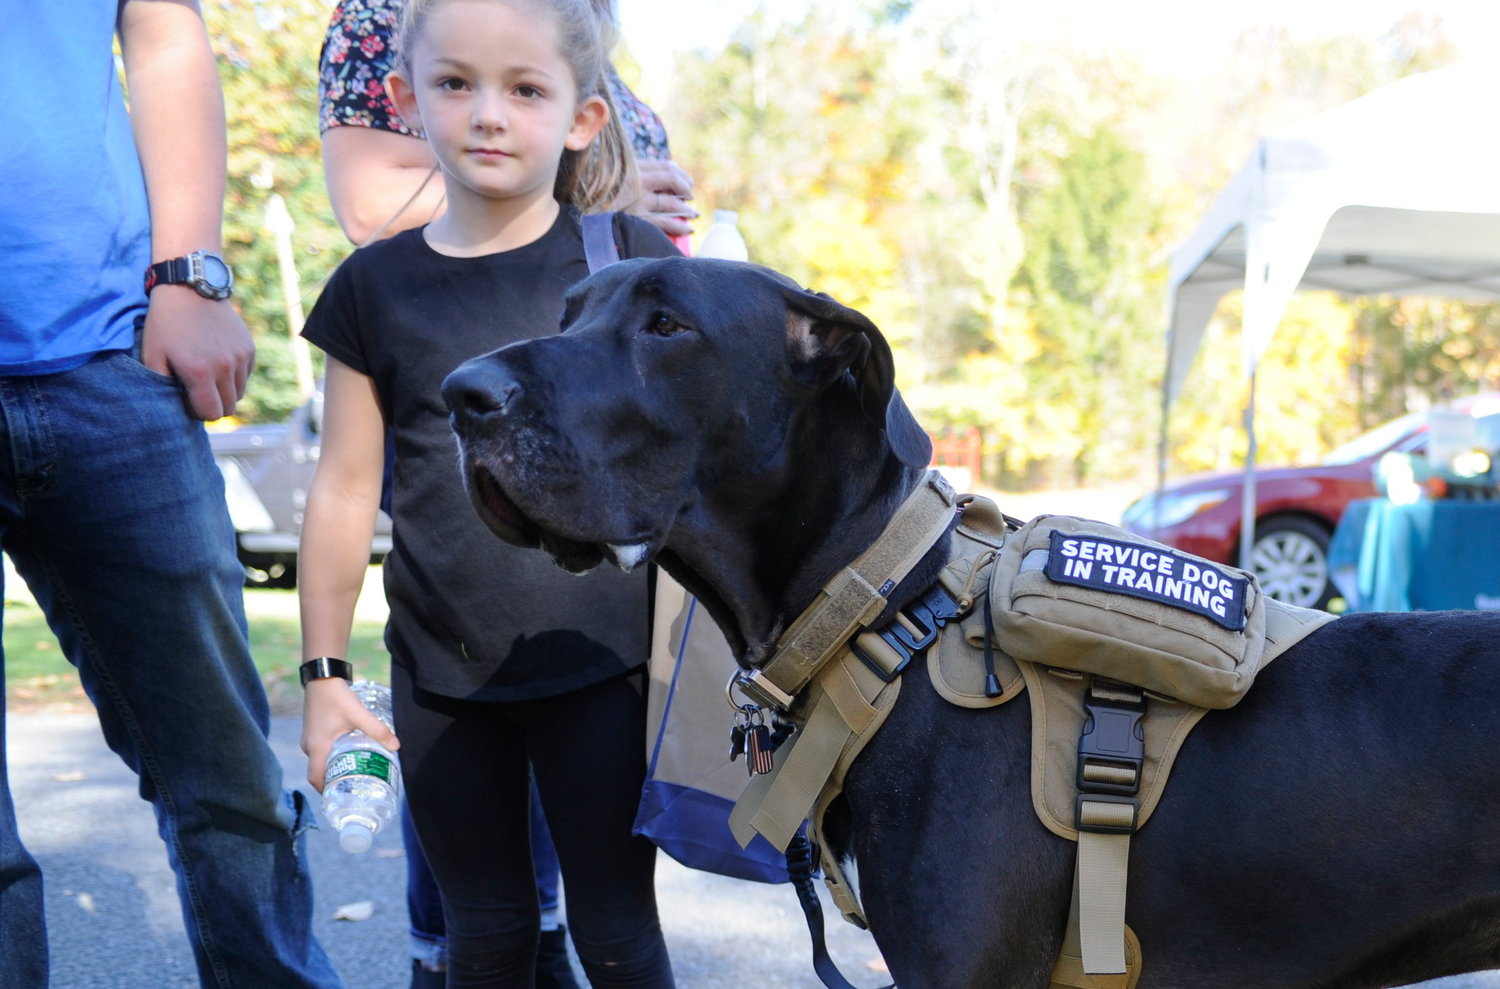 Katie Edwards, the seven-year-old daughter of Chris and Colleen Edwards, is pictured with Duke, her father’s Vet 2 Vet service dog in training. Edwards is a USMC veteran whose son Benjamin is a 17-year-old recruit in boot camp at Parris Island.